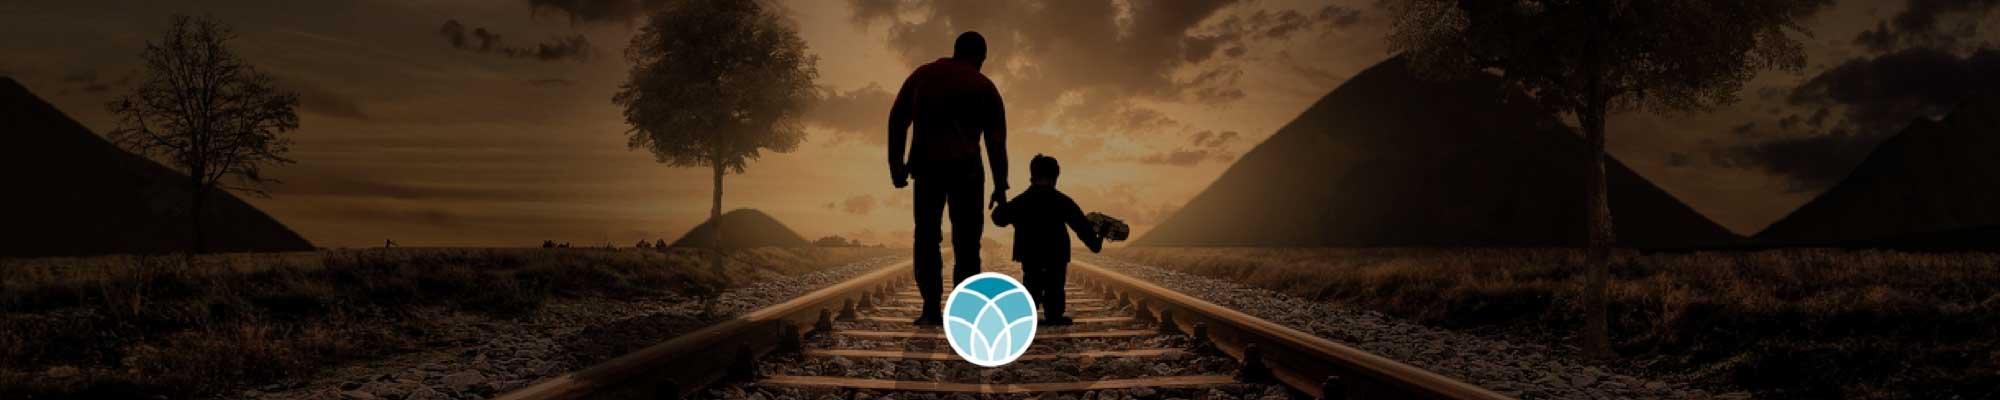 Image of an adult and child walking on railroad tracks with the Unity logo in the center.